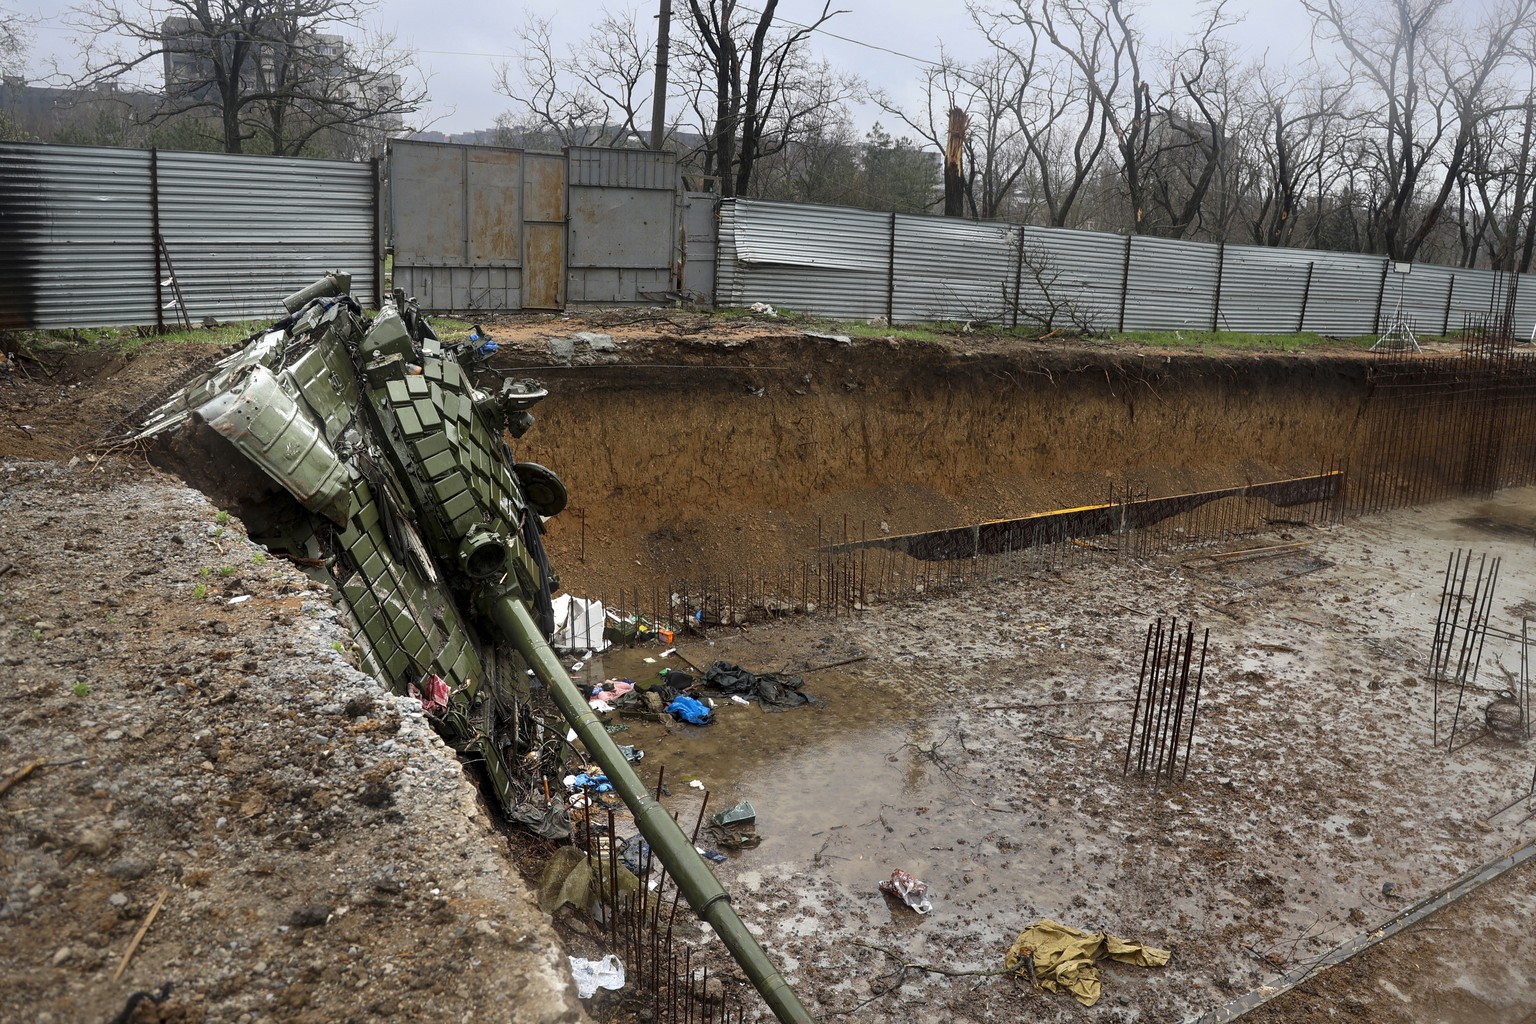 A tank damaged during fighting is seen at the foundation pit for a house under construction in an area that Russian-backed separatists claim to control in the Ukraine city of Mariupol, Wednesday, Apri ...